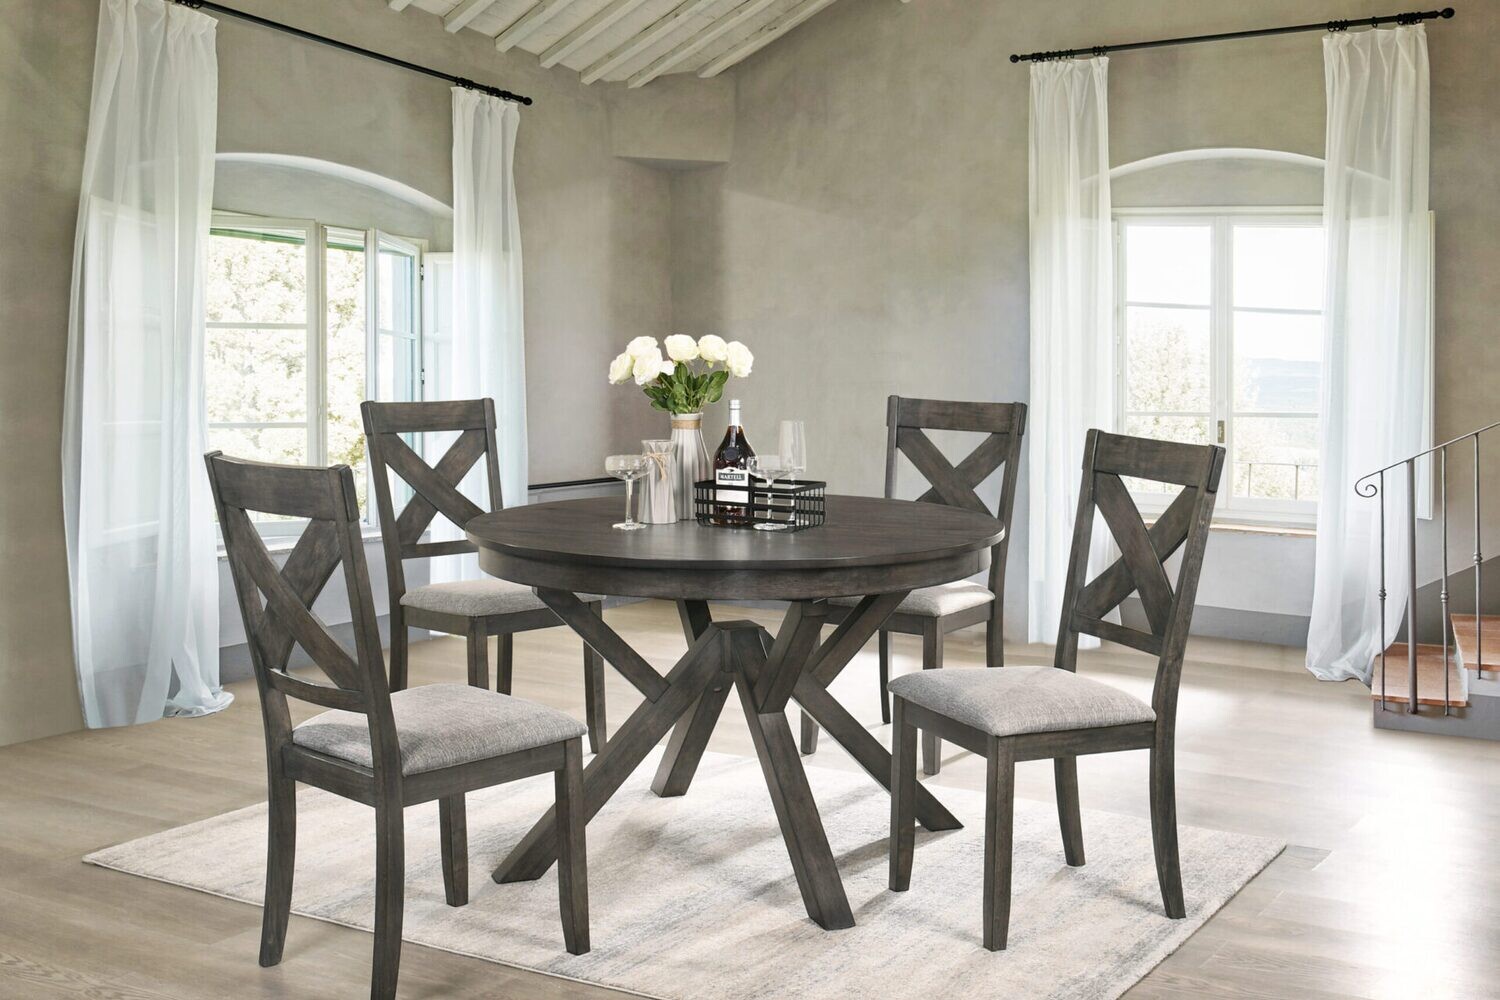 GULLIVER ROUND TABLE &amp; 4 CHAIRS SET